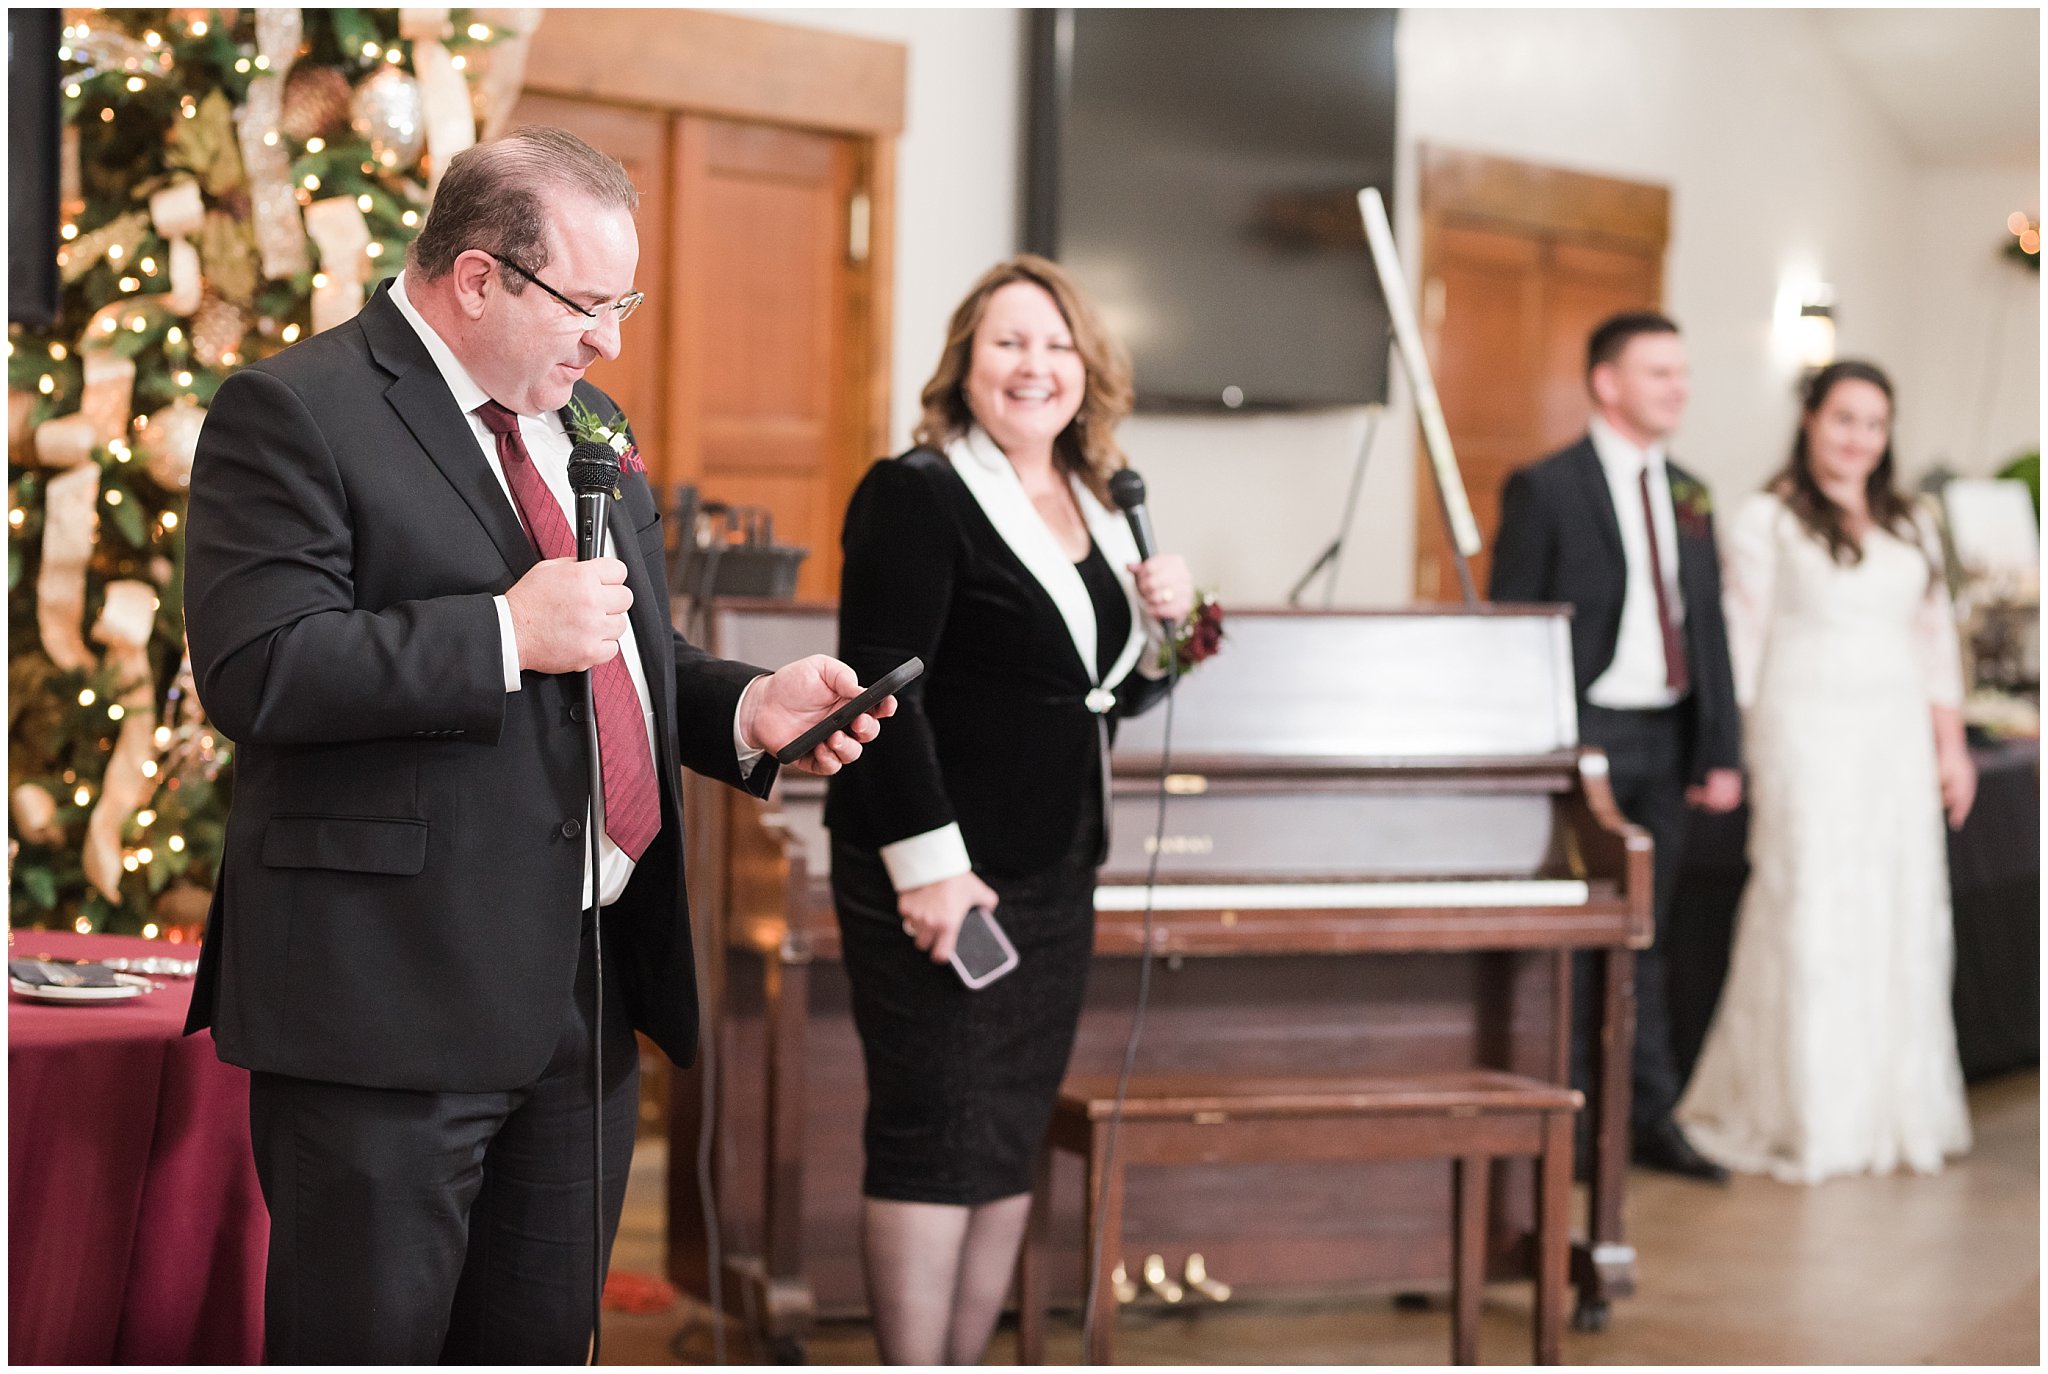 Toasts and speeches at Gathering Place at Gardner Village | Oquirrh Mountain Temple and Gardner Village Wedding | The Gathering Place | Jessie and Dallin Photography